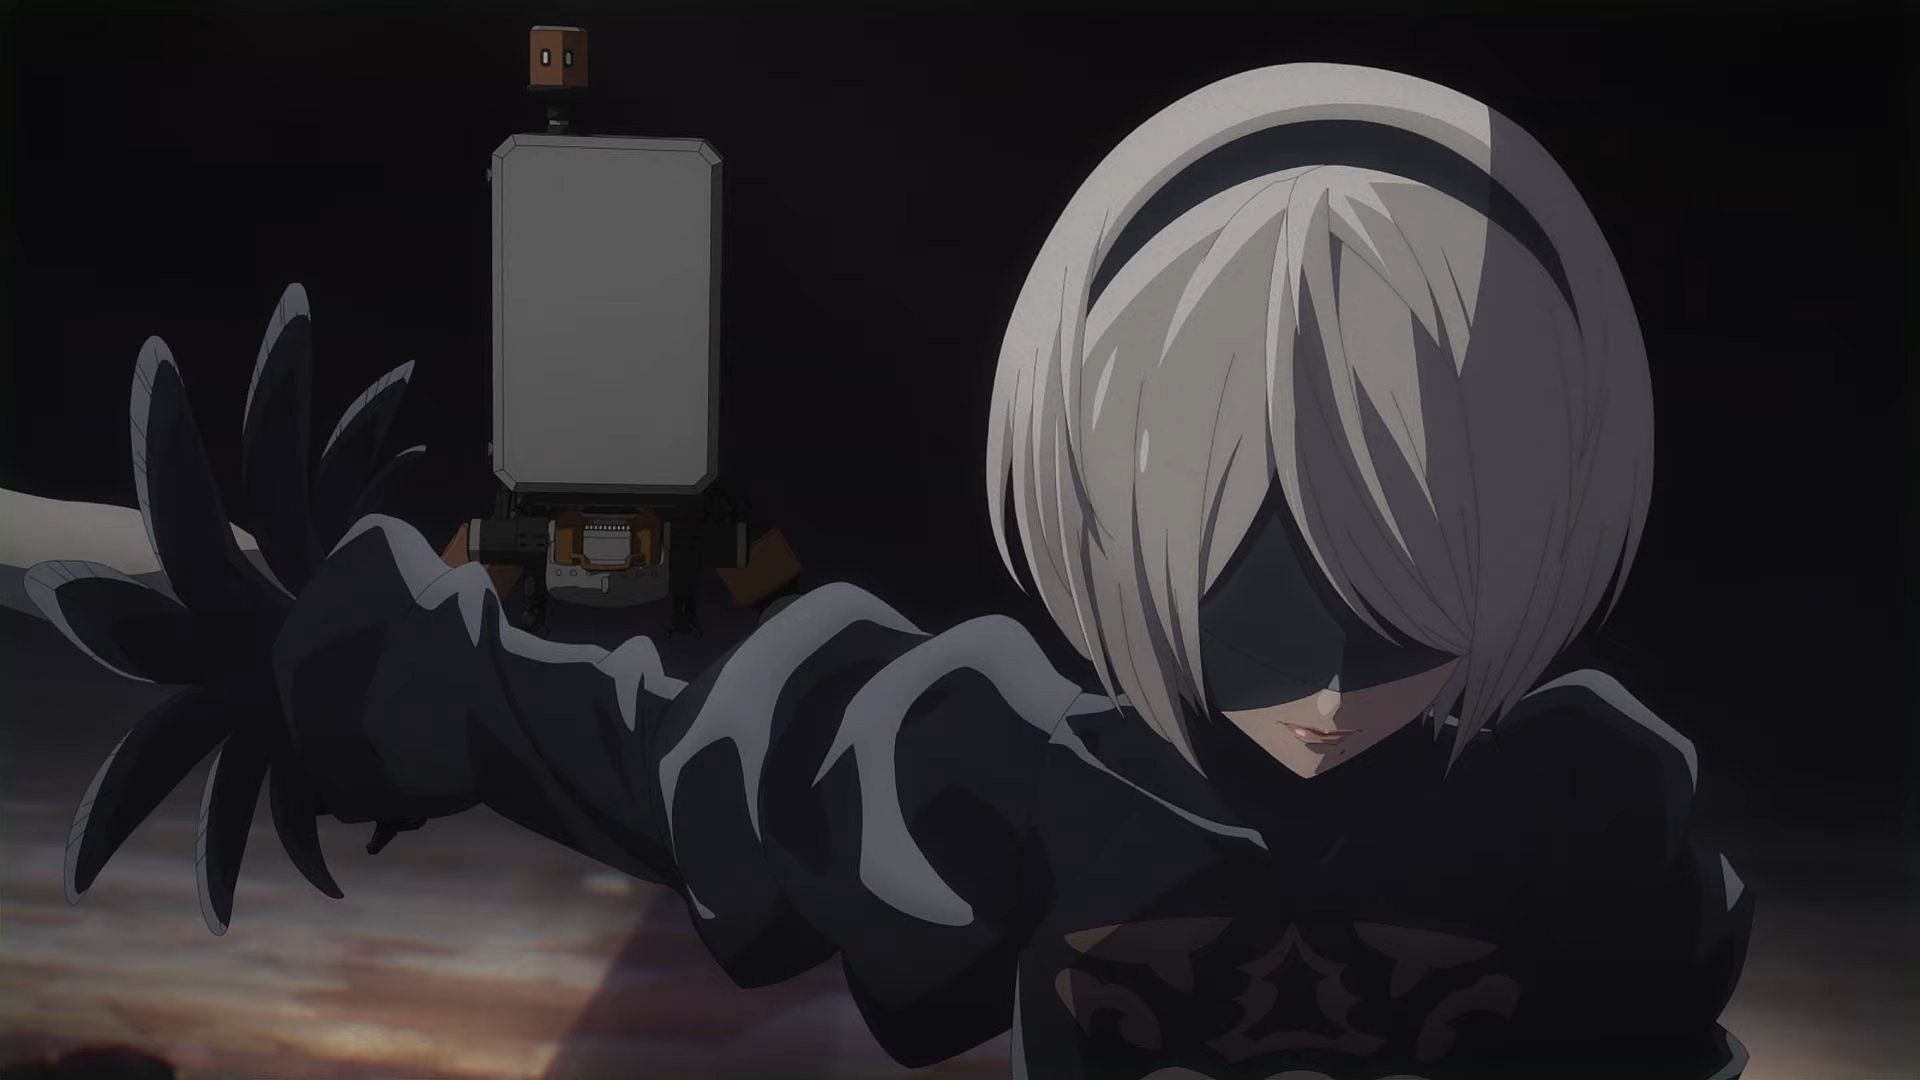 2B as seen in the series (Image via A-1 Pictures)